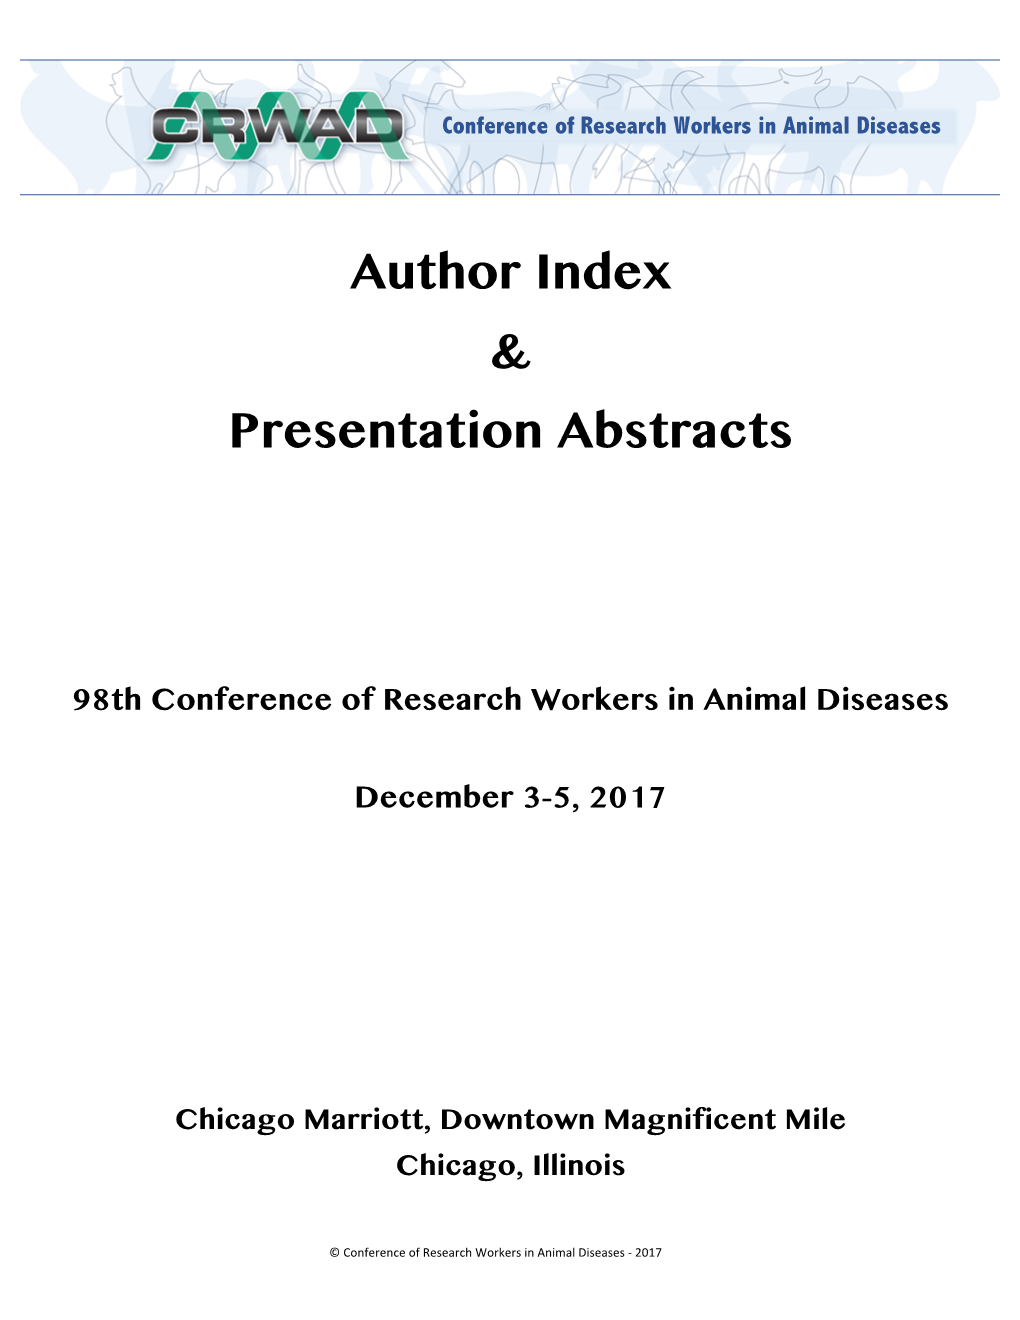 CRWAD 2017 Author Index and Abstracts